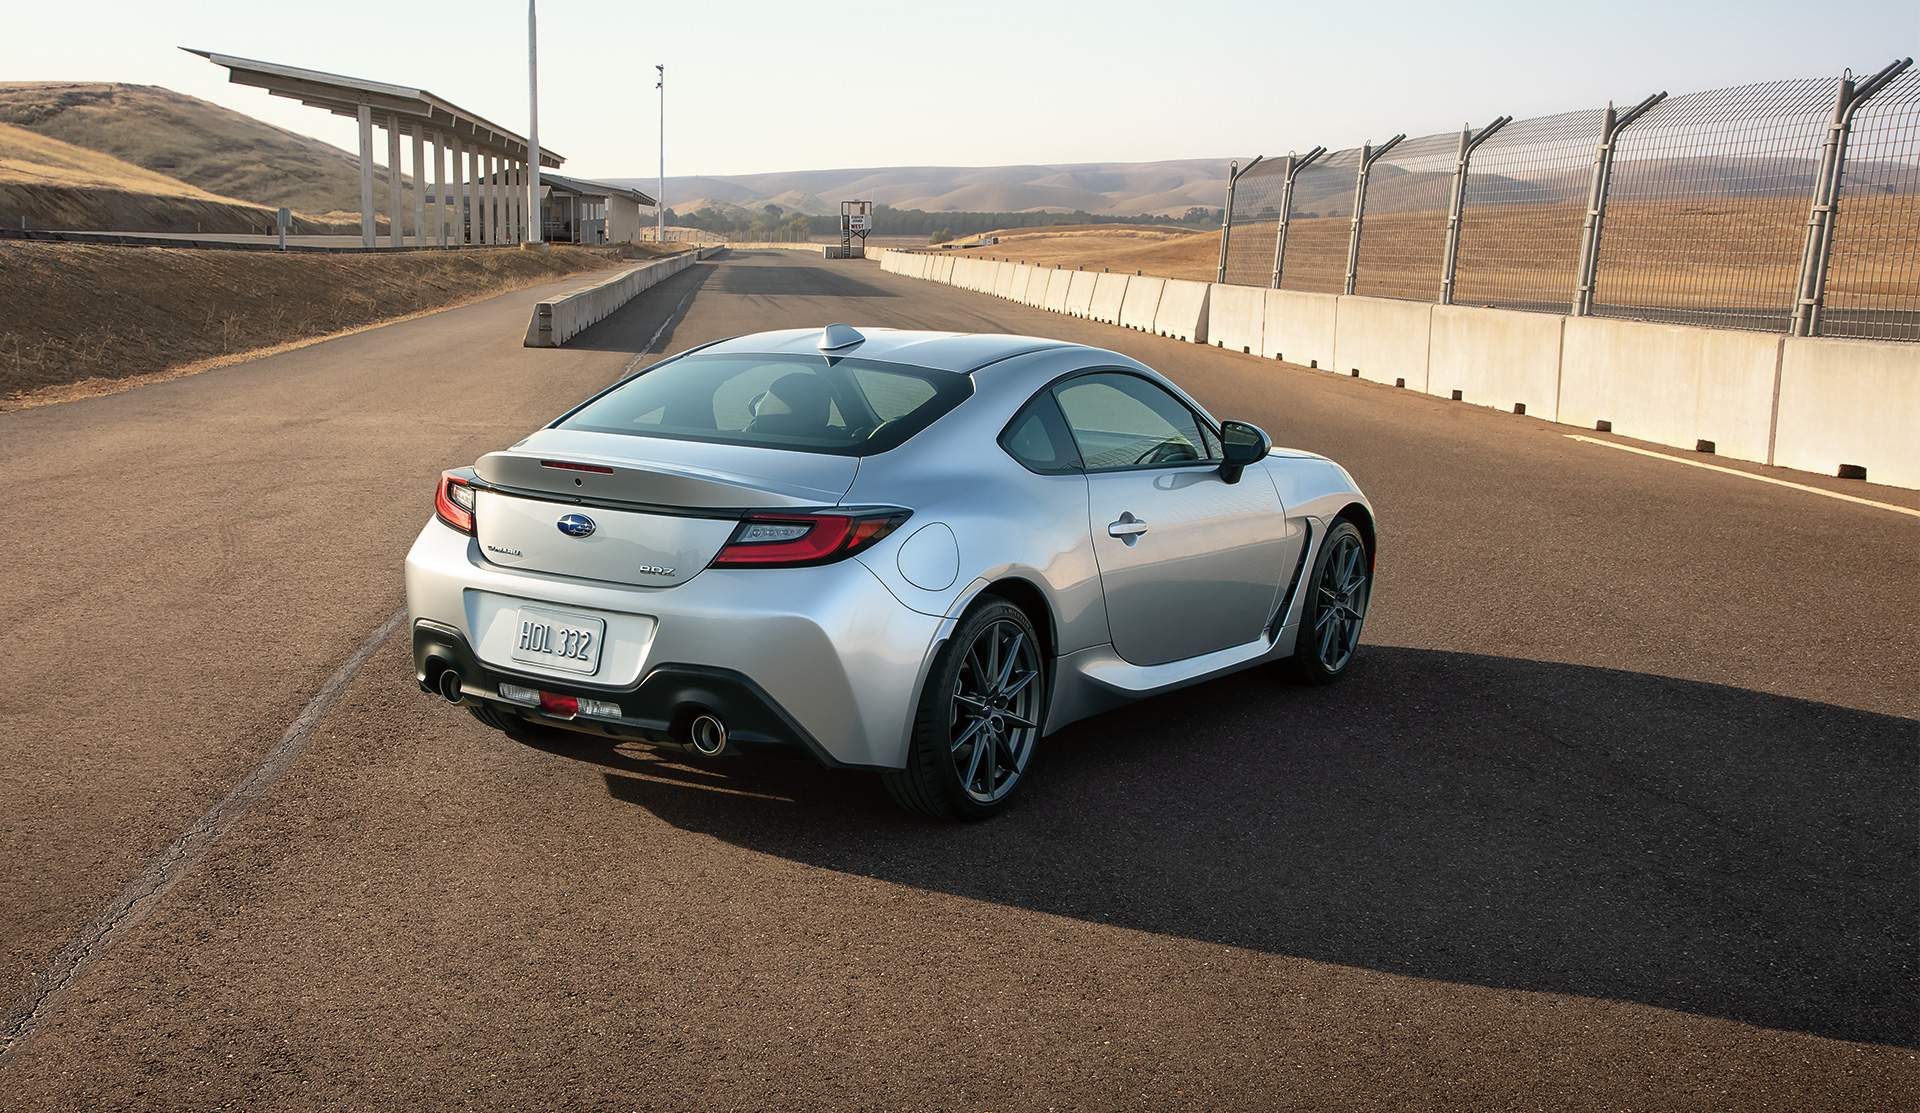 Rear view of the 2024 BRZ stopped by the fence at the race track.